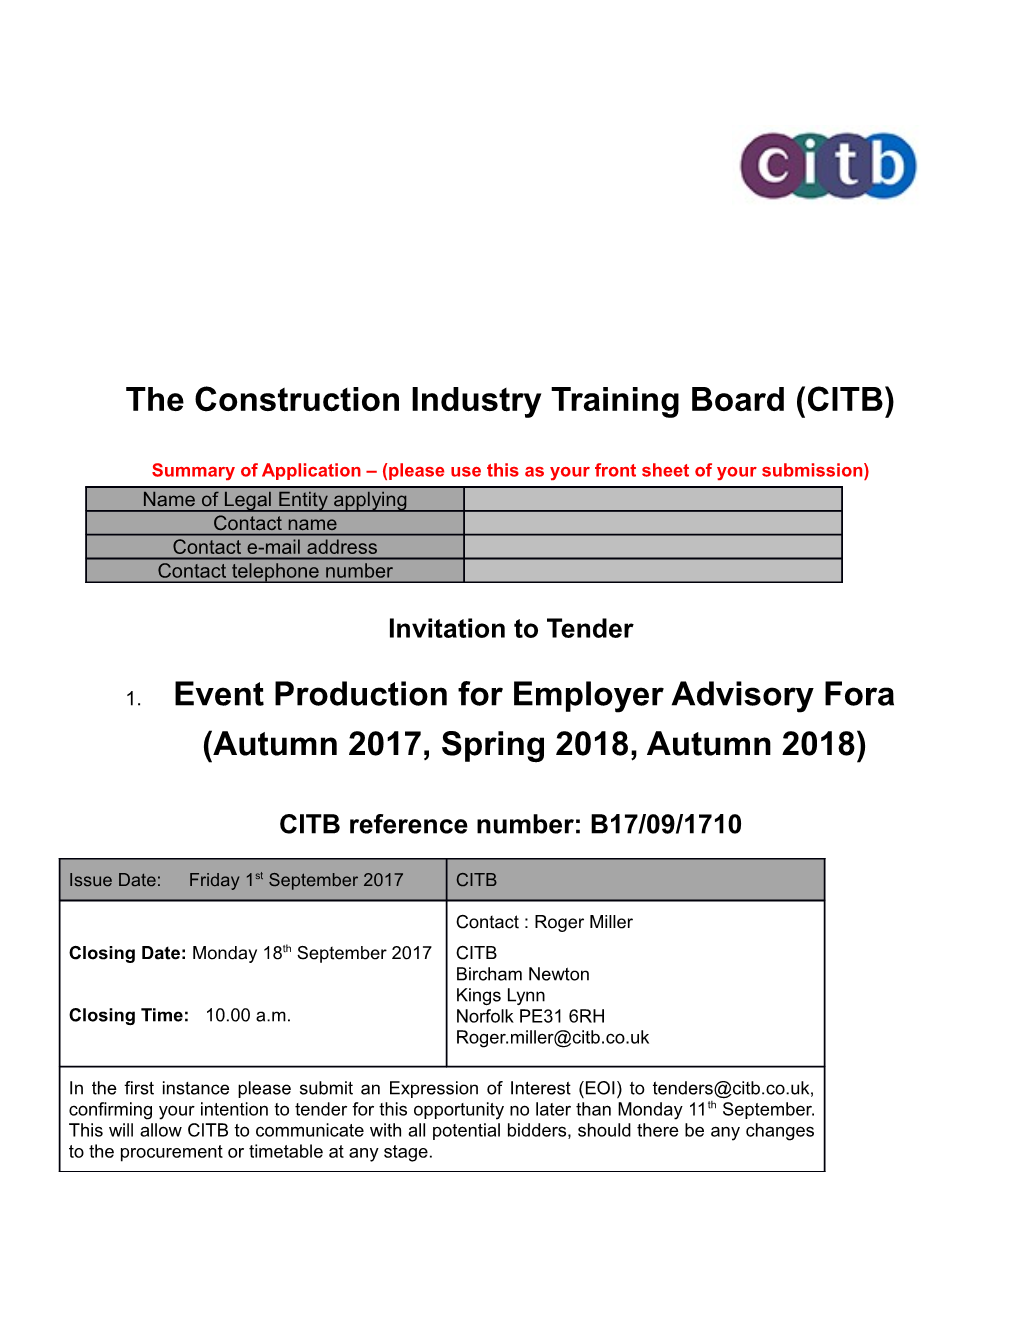 The Construction Industry Training Board (CITB)